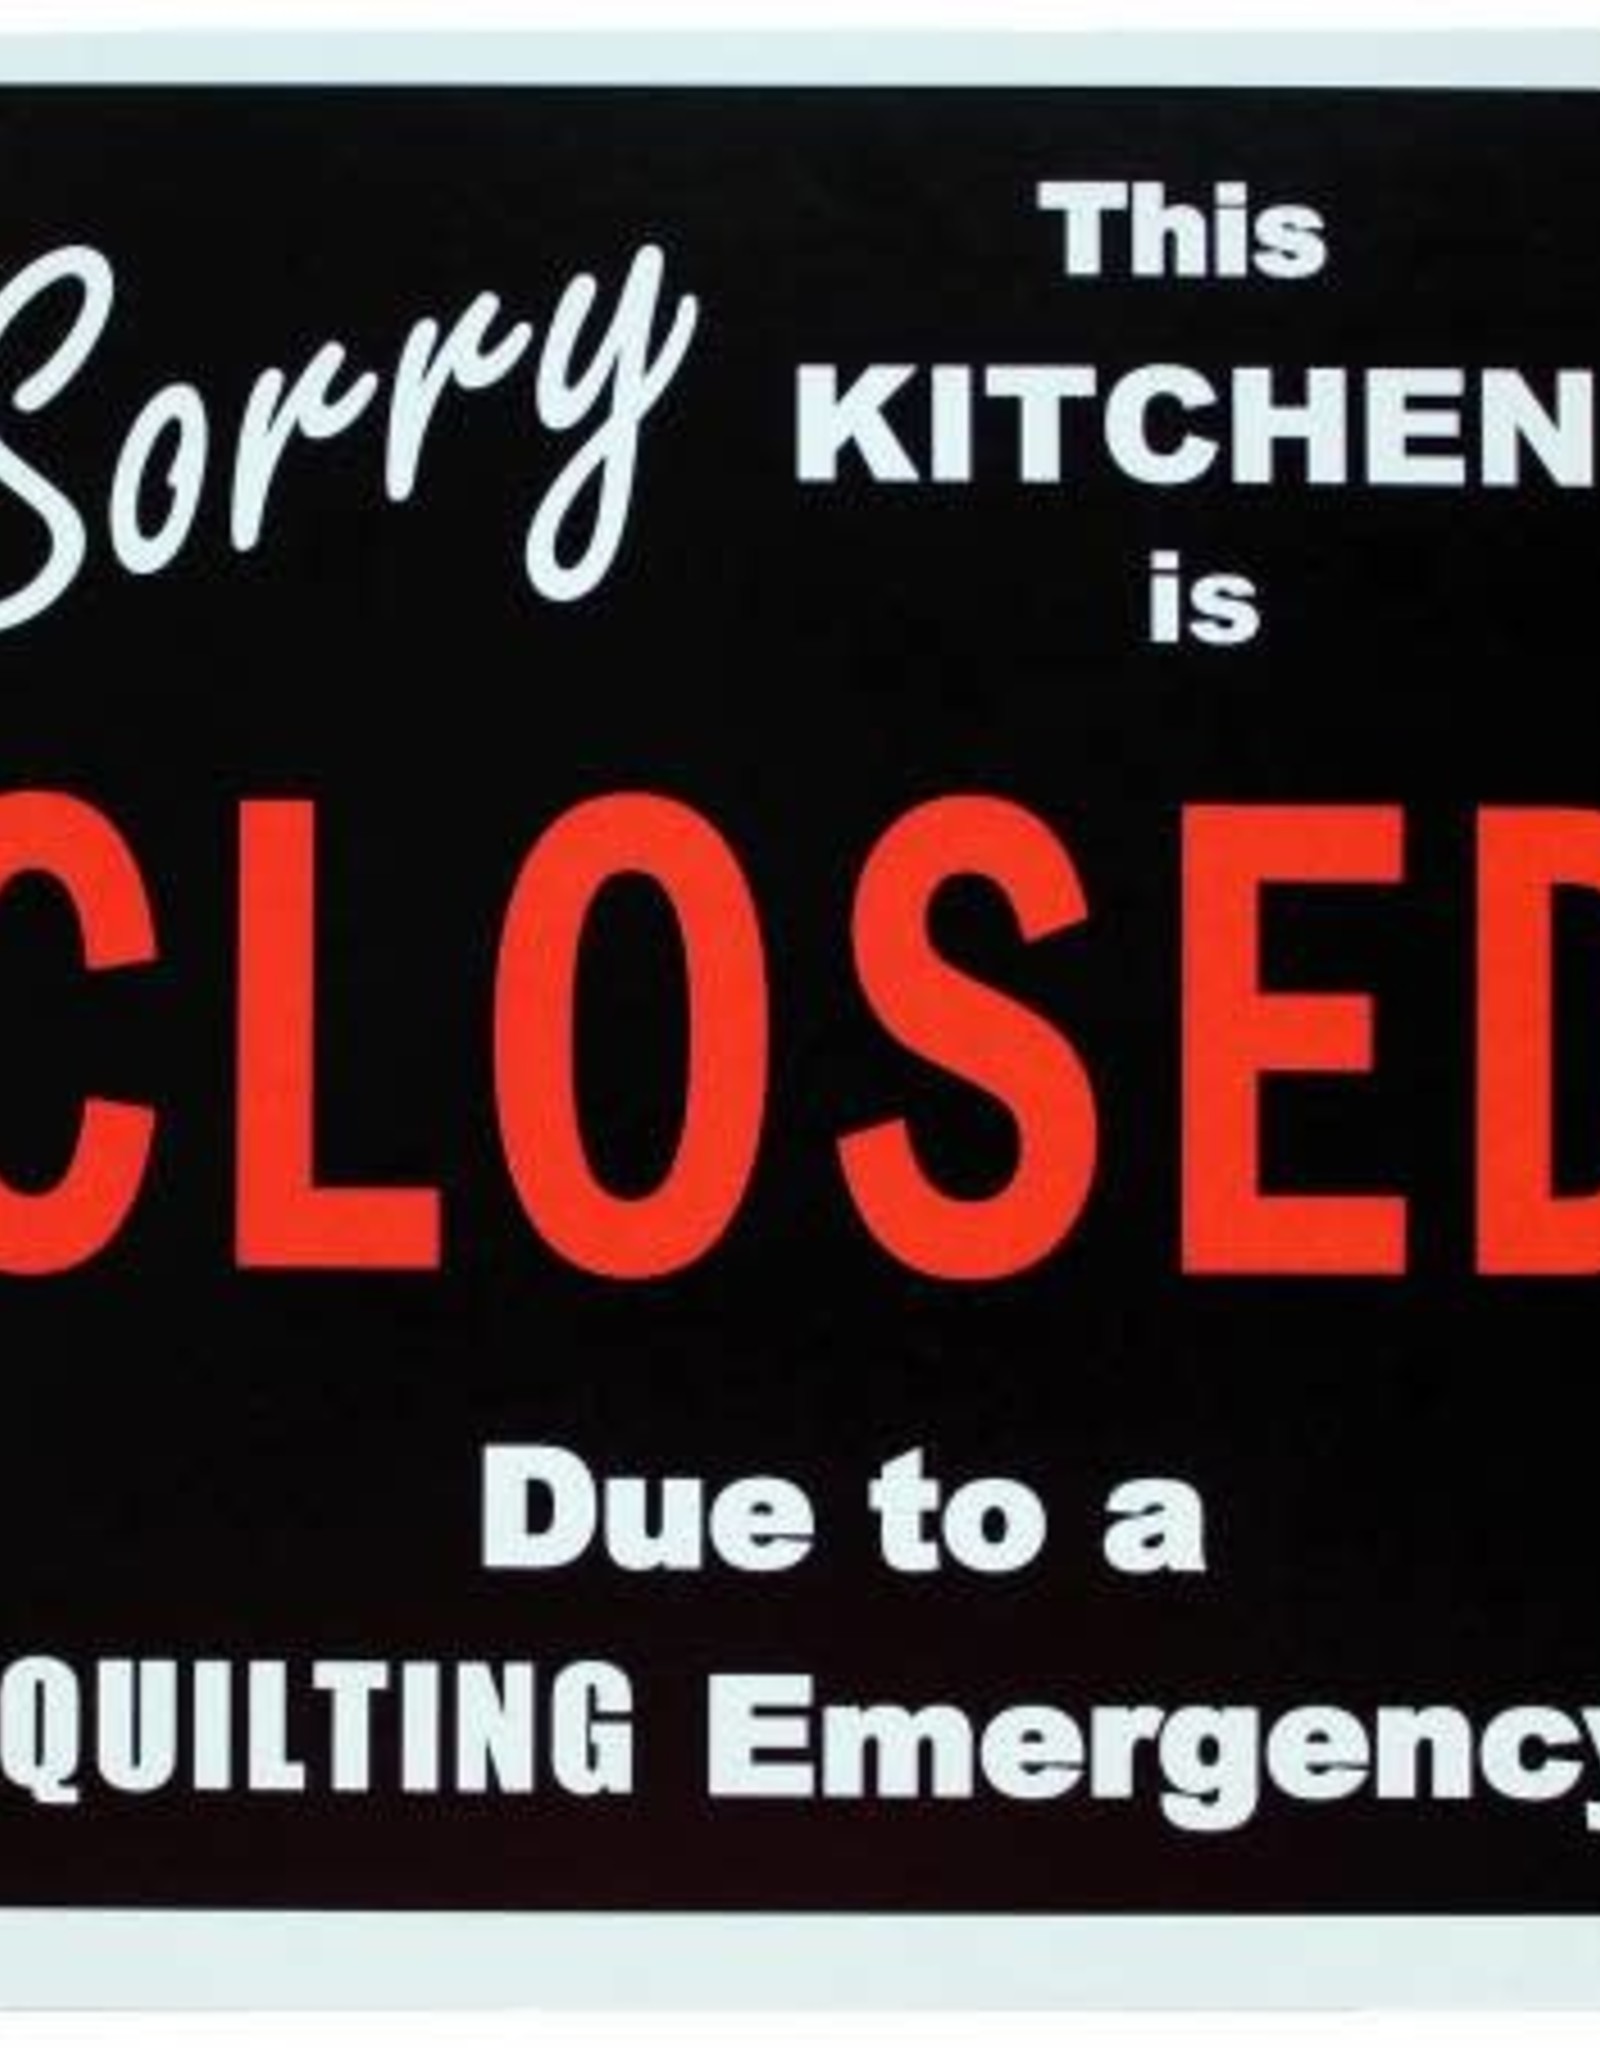 Sorry Kitchen Closed Magnet